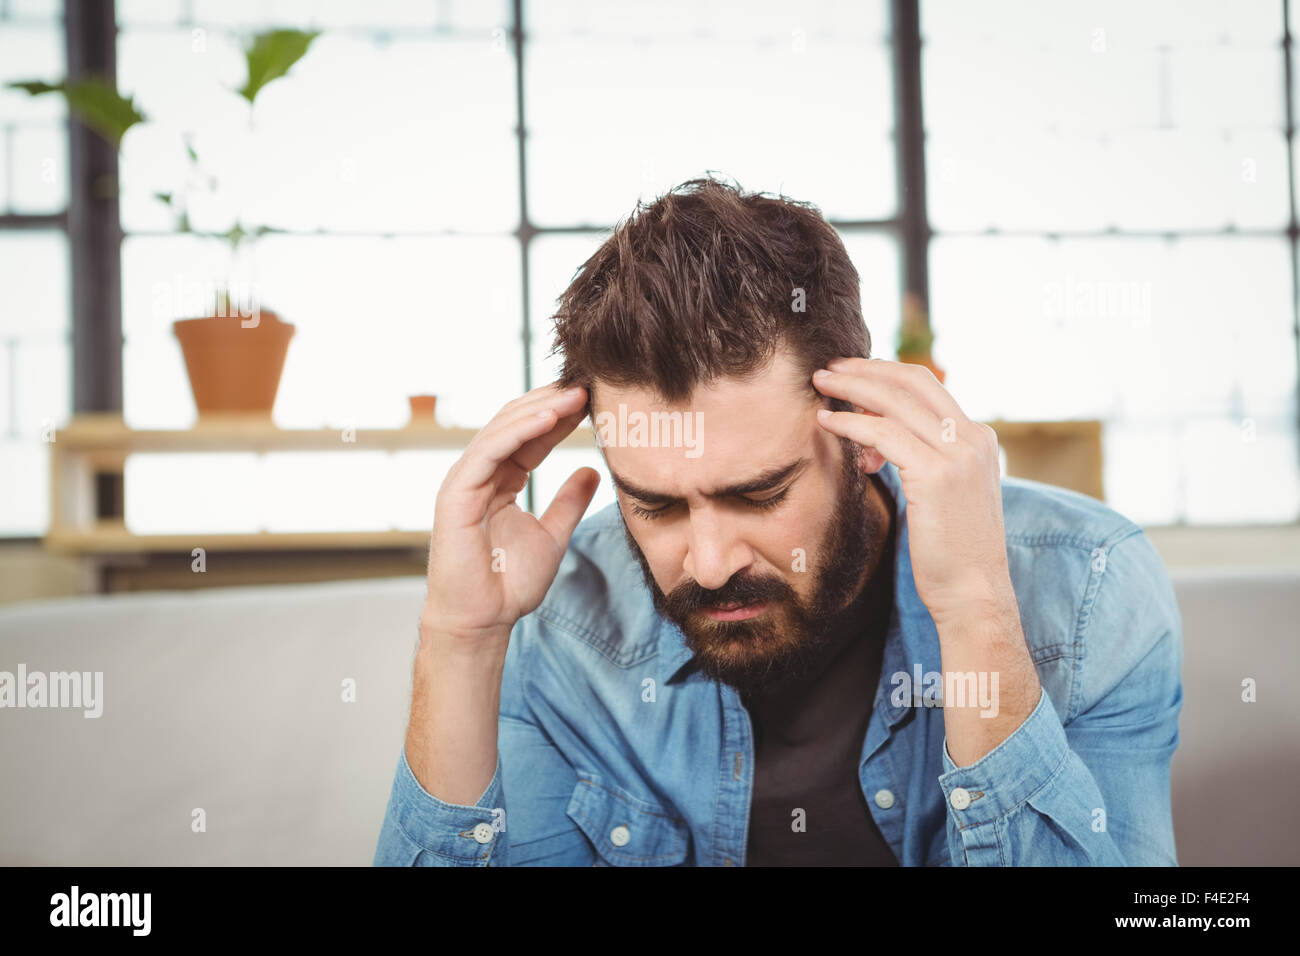 Stressed man hand on forehead Stock Photo